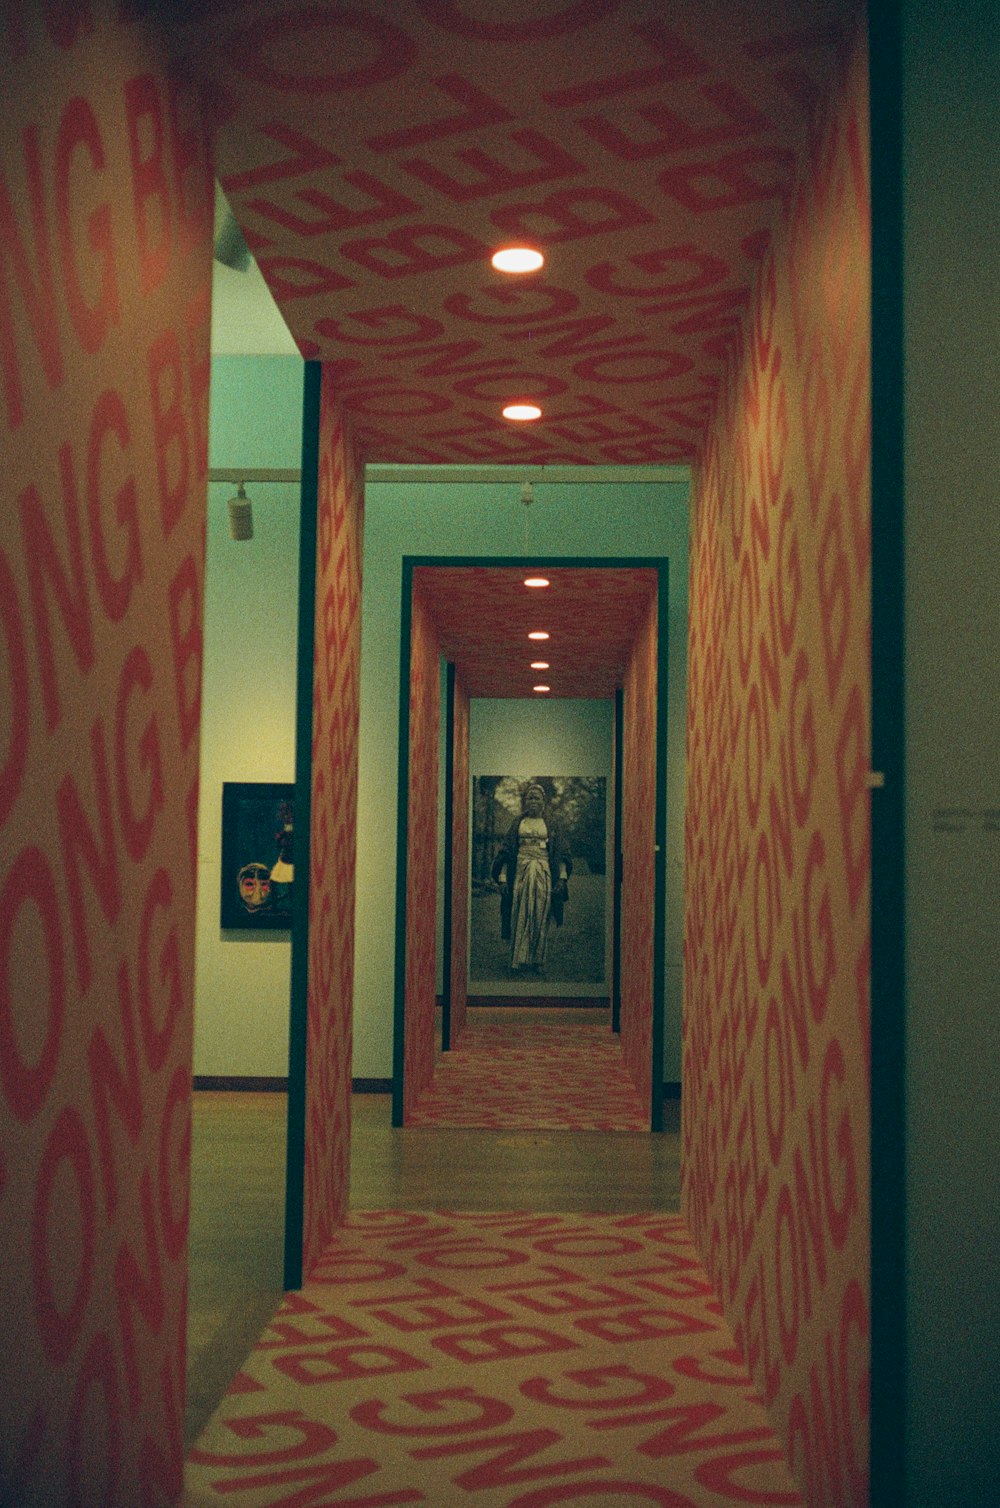 a long hallway with a red and white pattern on the wall